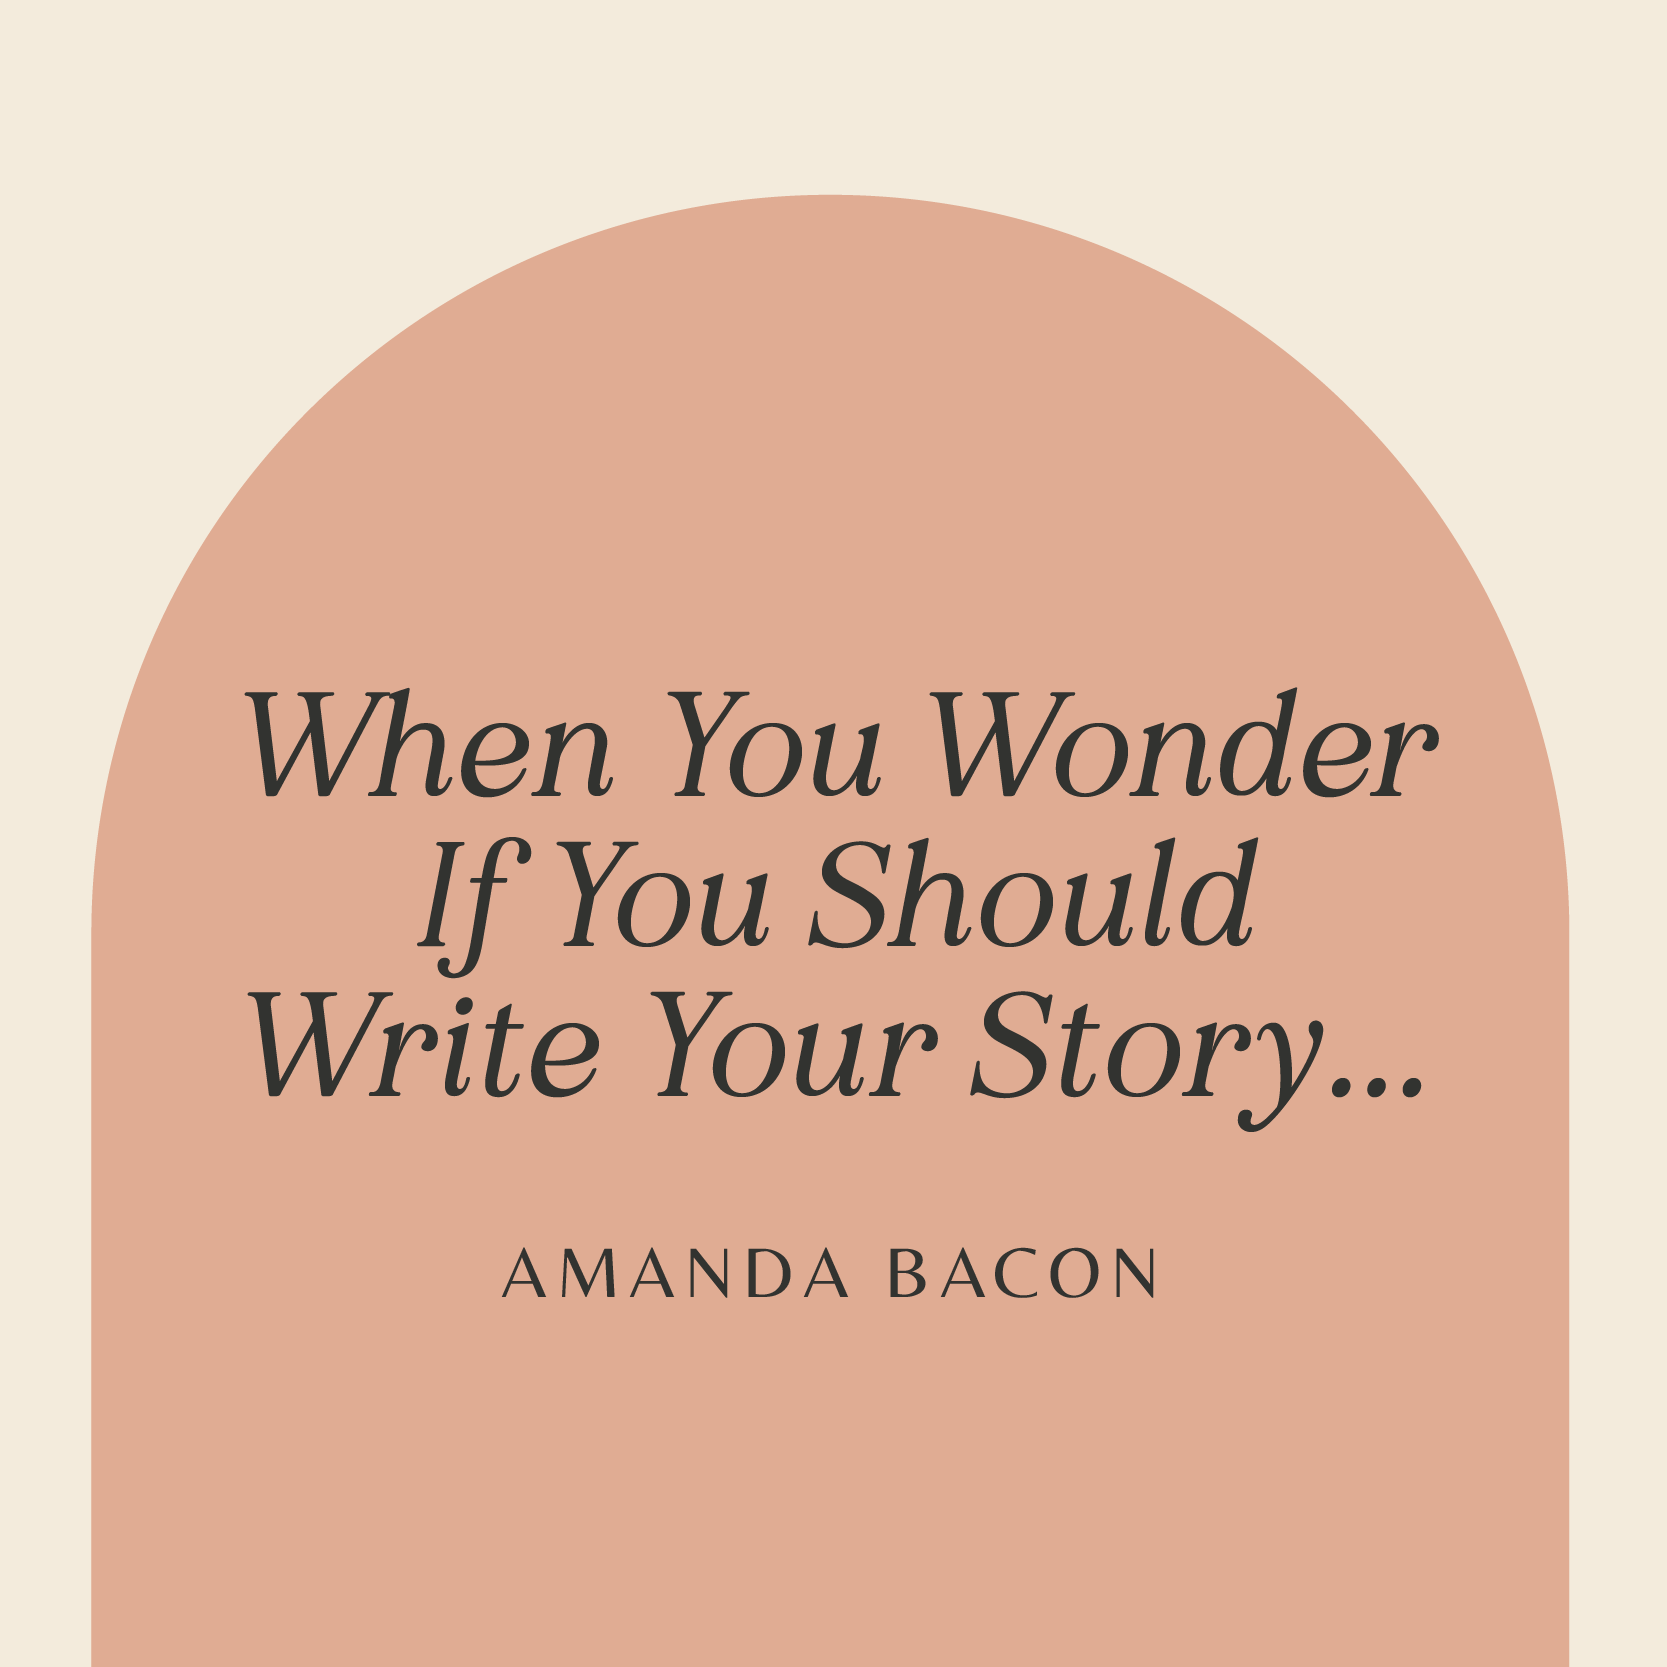 When you wonder if you should write your story...